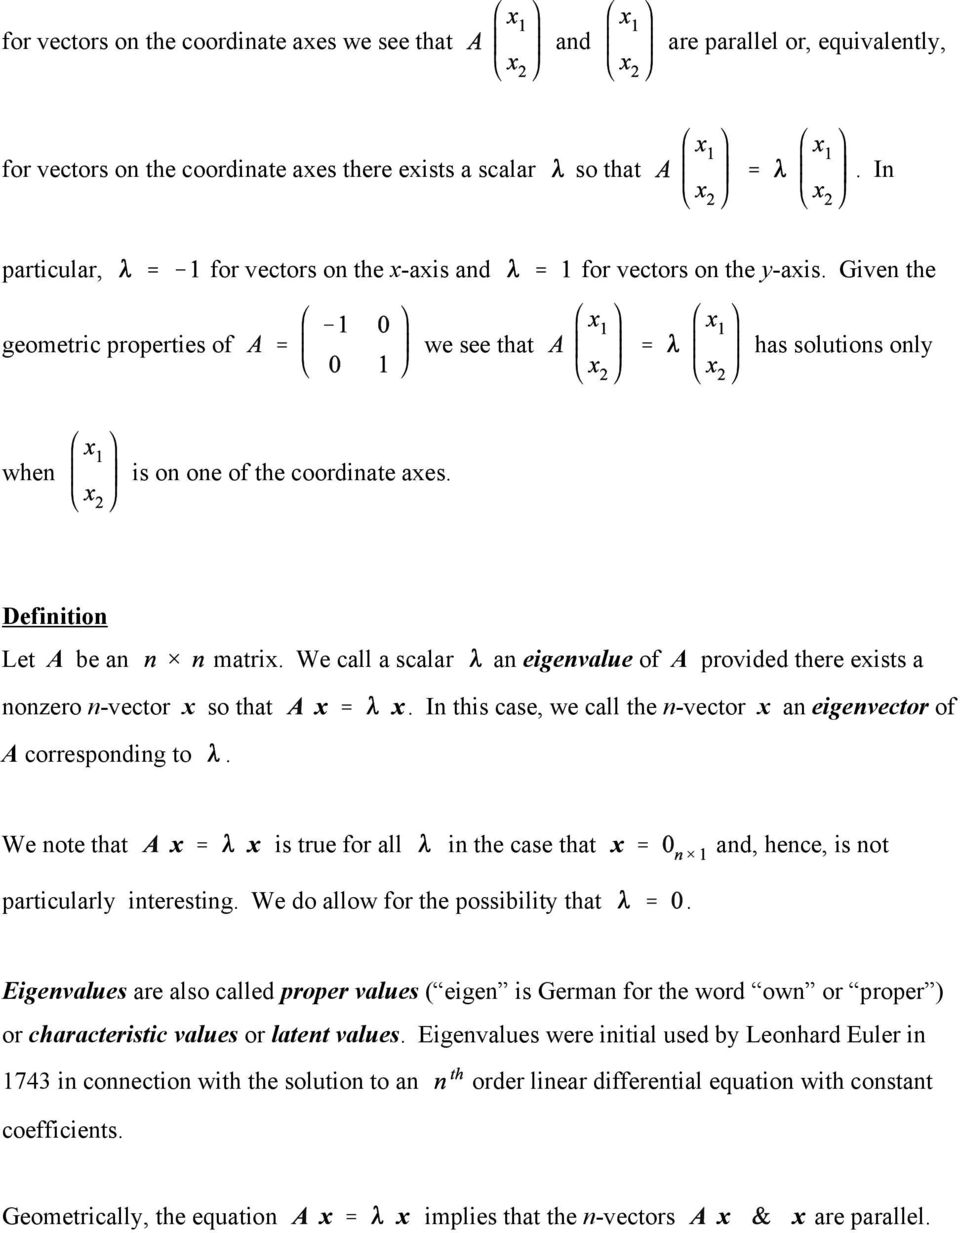 there exists a nonzero n-vector x so that In this case, we call the n-vector x an eigenvector of A corresponding to We note that is true for all in the case that and, hence, is not particularly